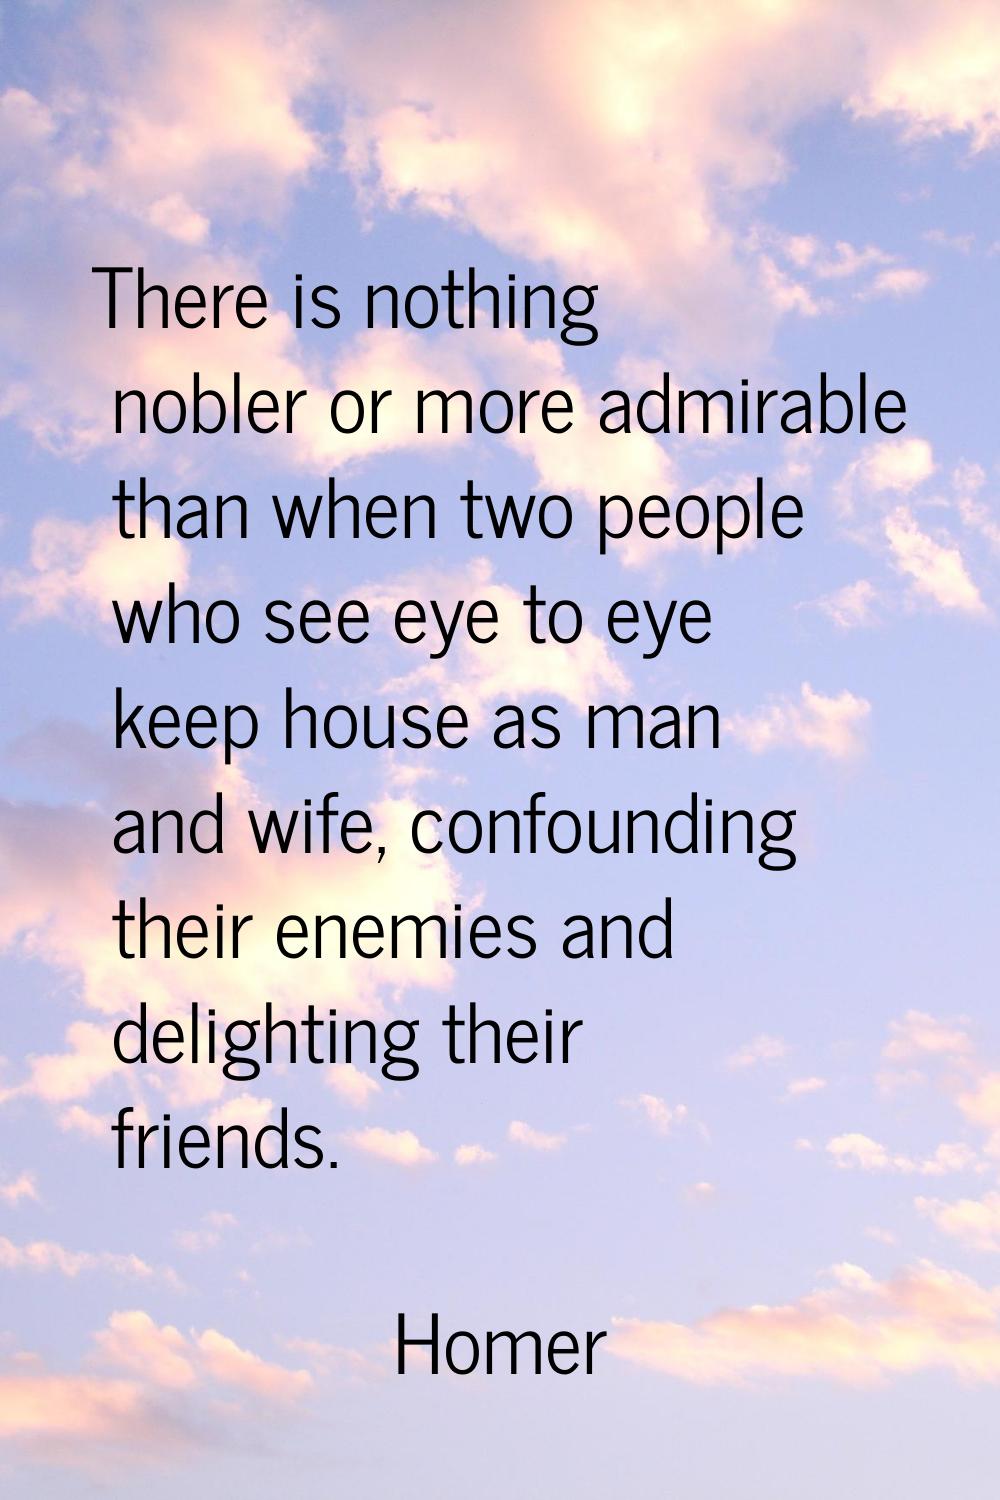 There is nothing nobler or more admirable than when two people who see eye to eye keep house as man